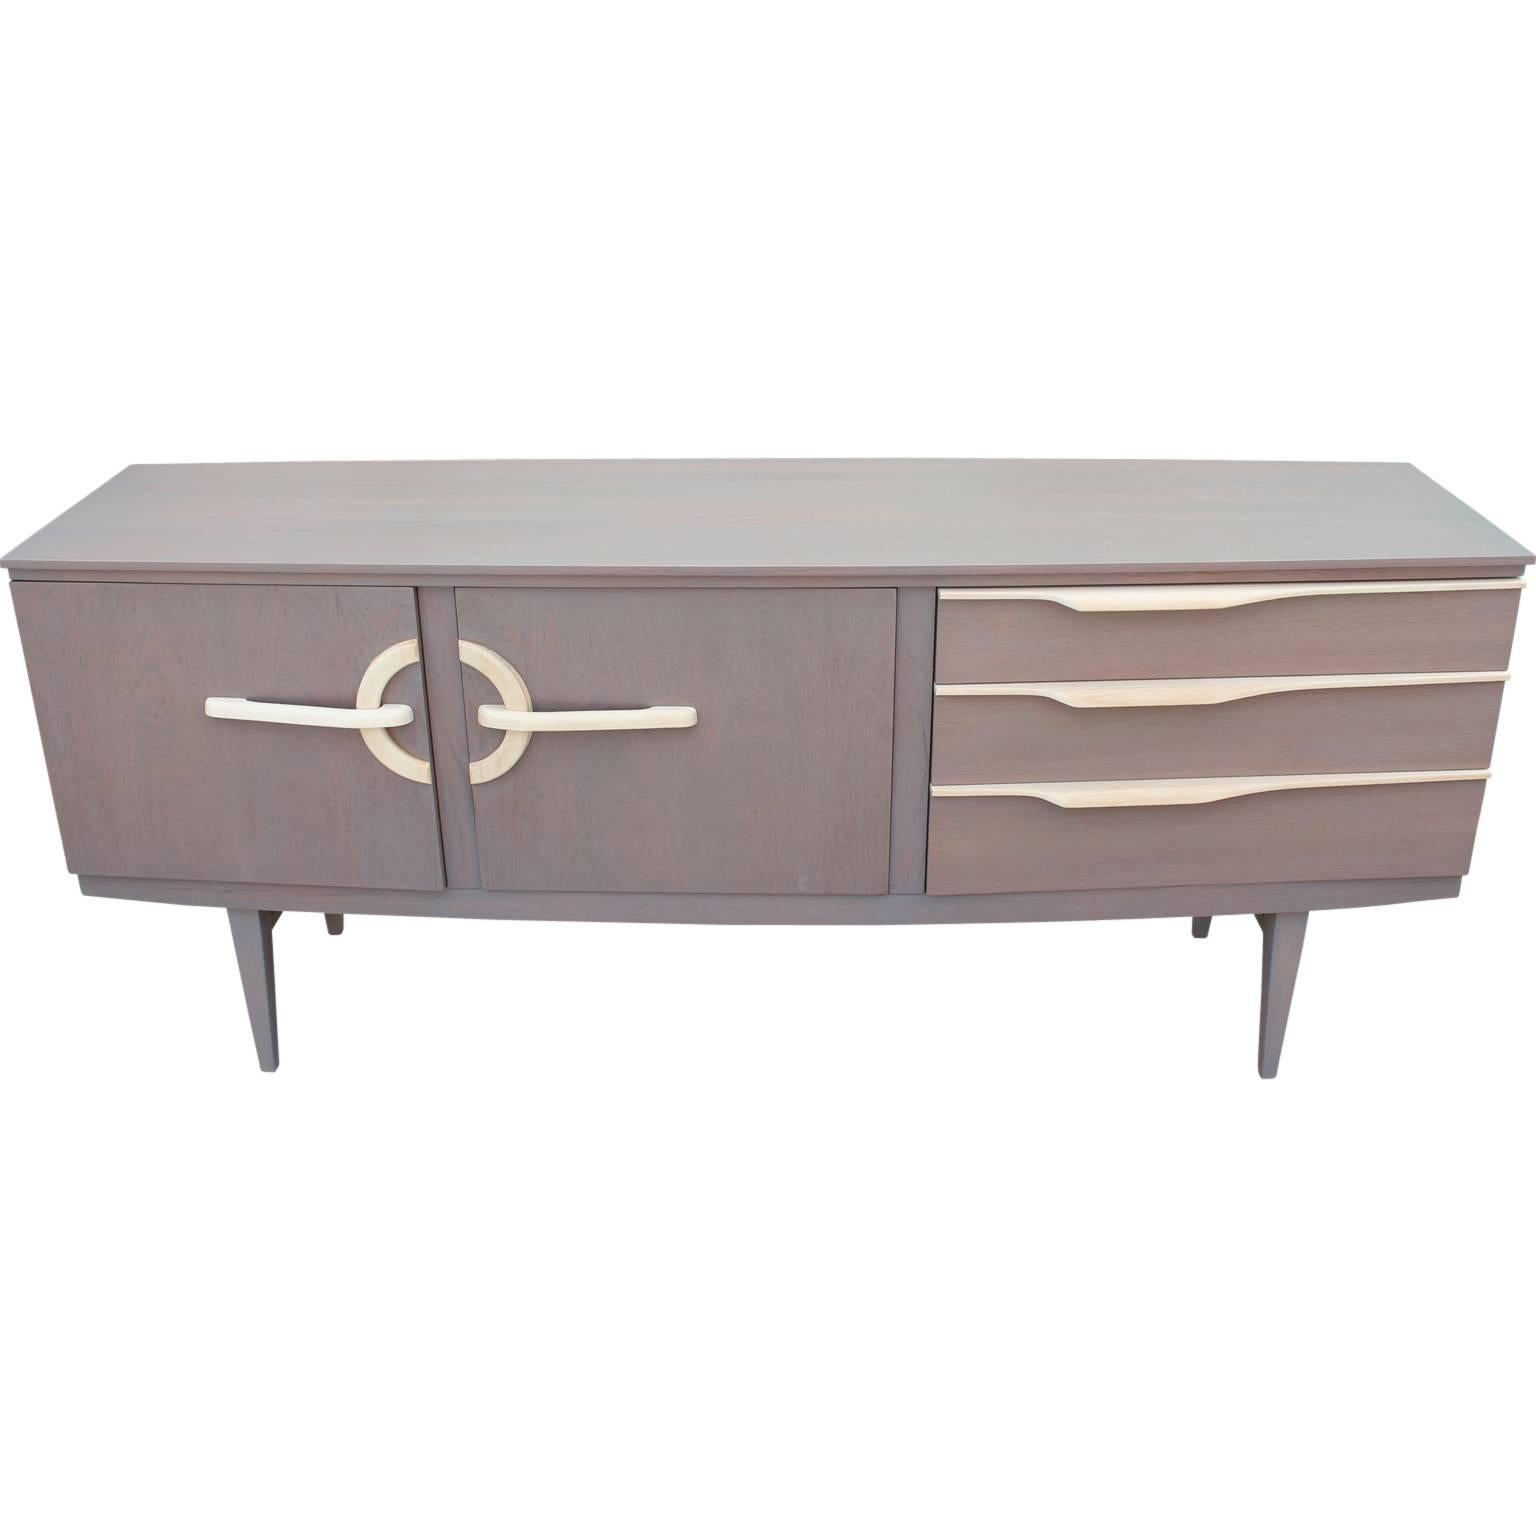 Gorgeous credenza or sideboard recently refinished in a light gray that allows some of the natural wood grain to show through, with bleached wood accents. Super unique! Top drawer reveals 3 divisions to help store small items.